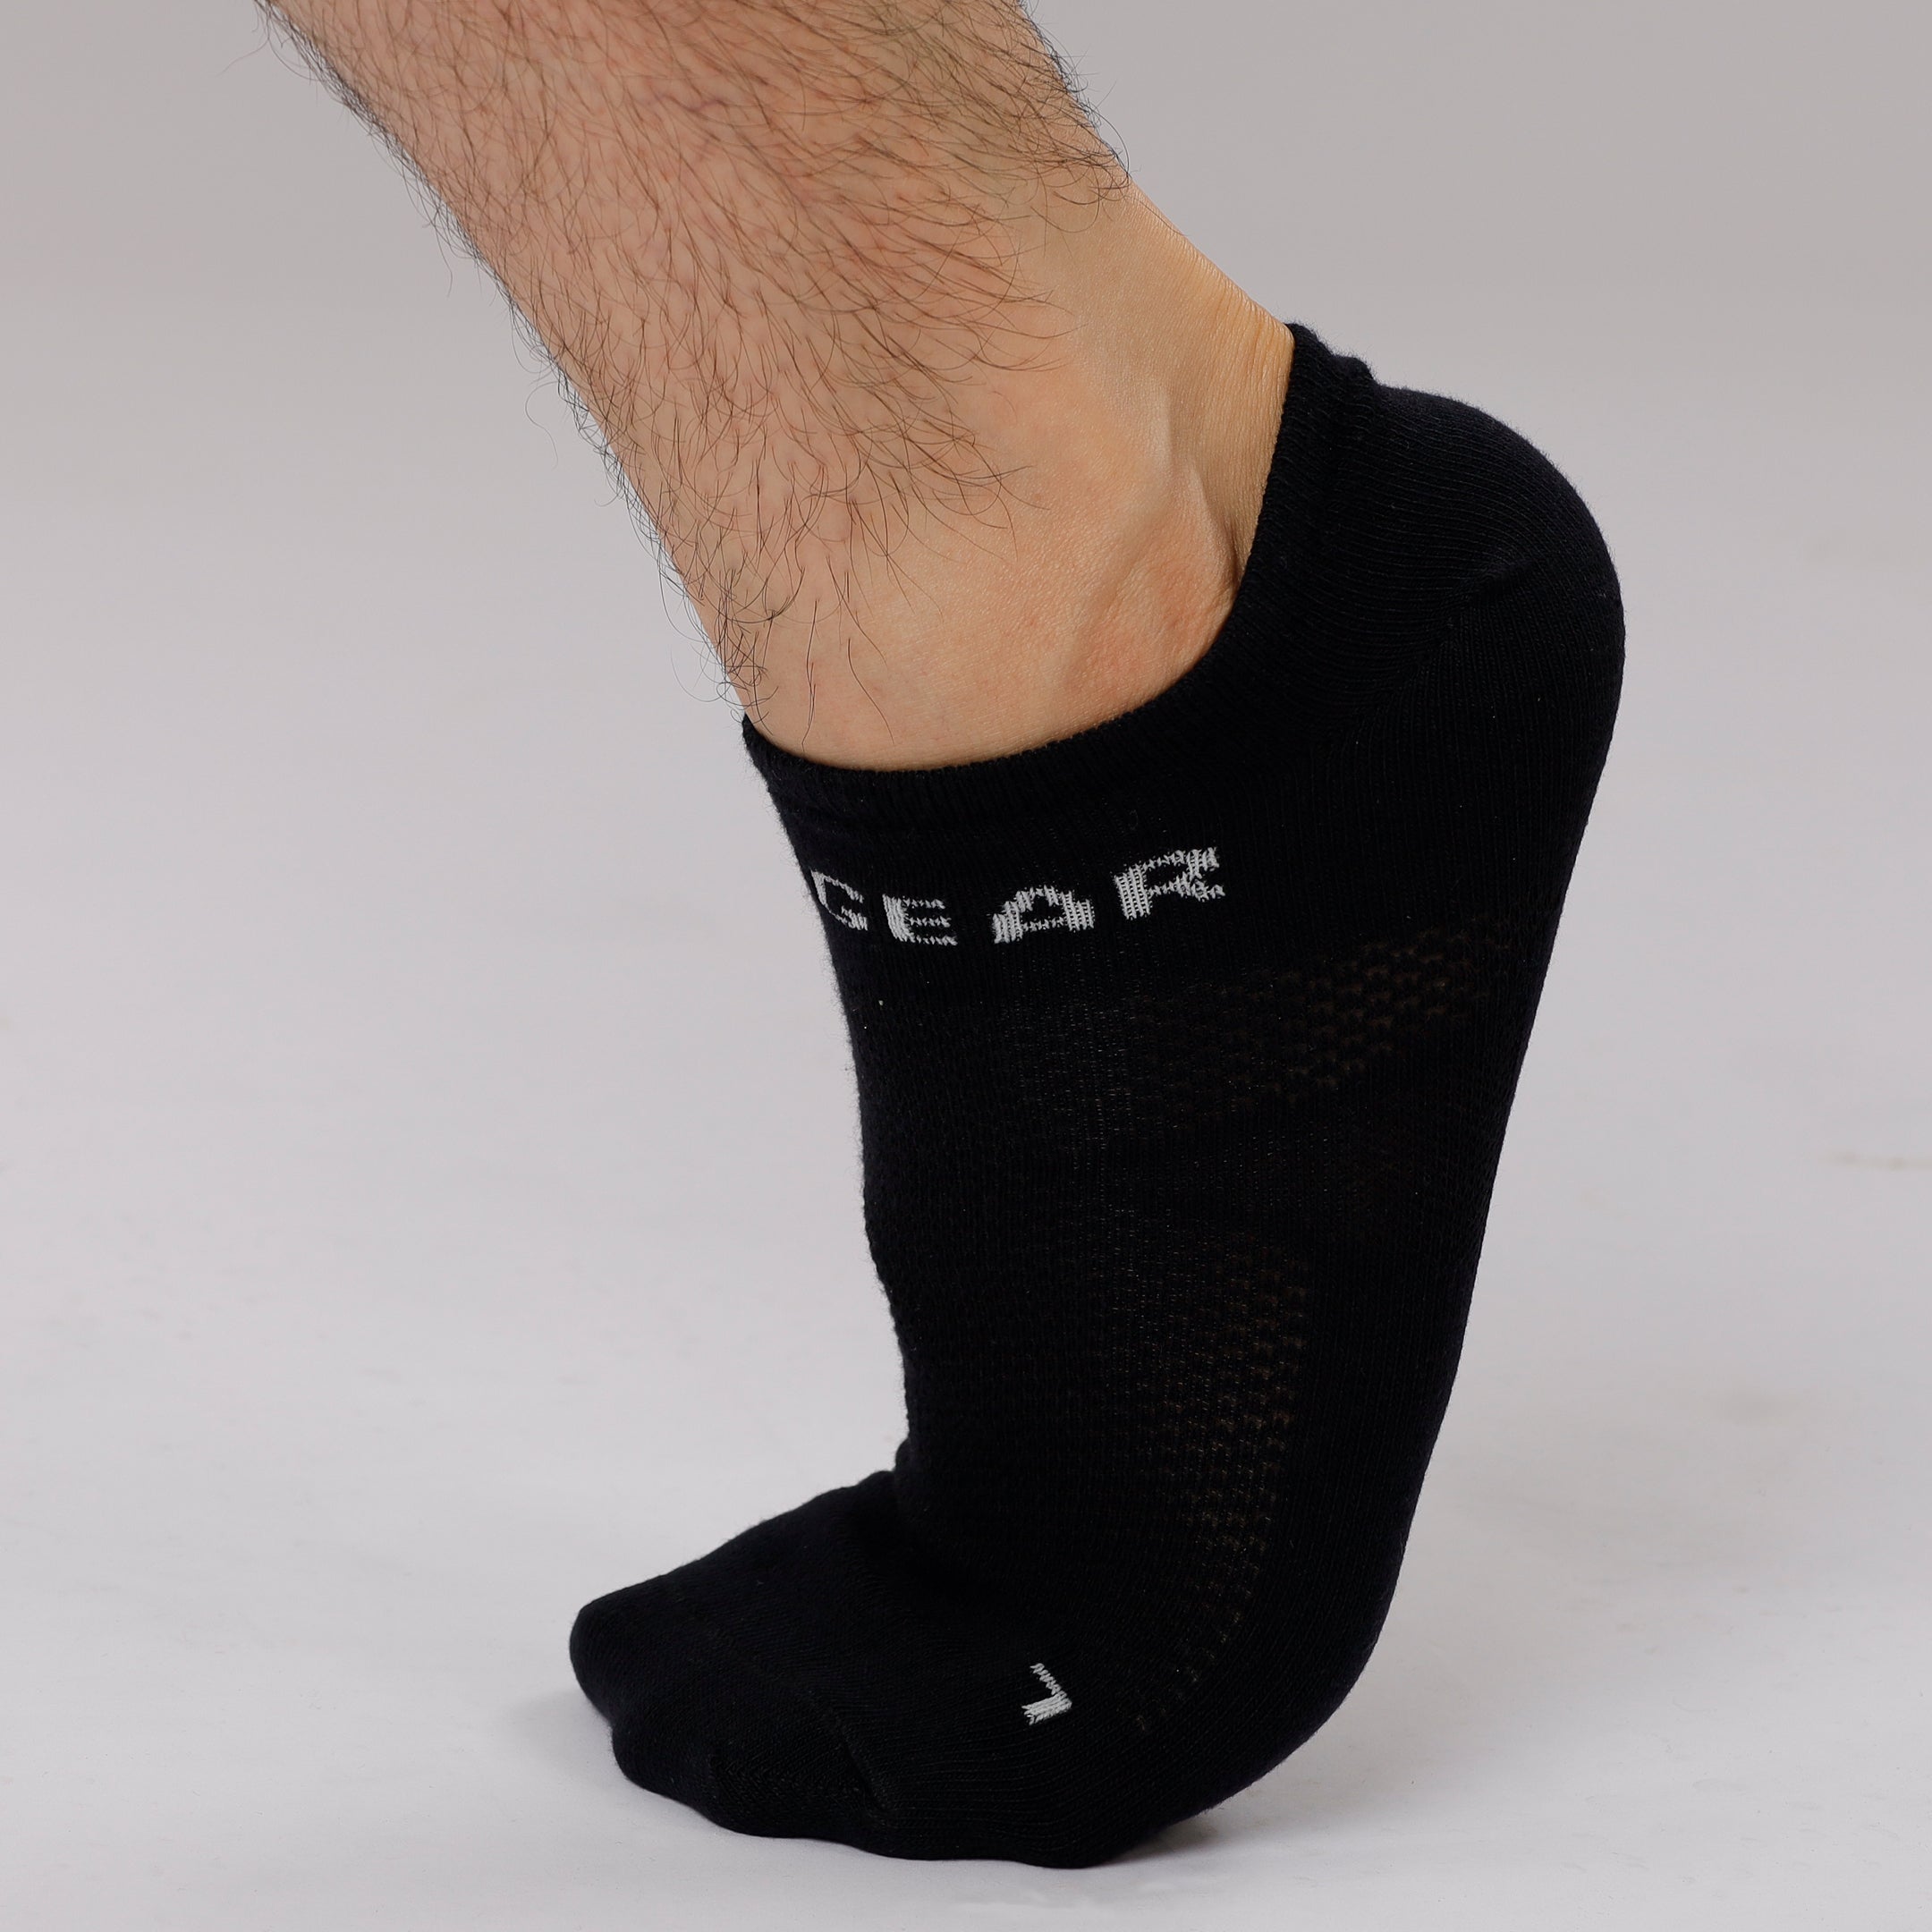 Unisex No-Show Performance Socks Pack of 3